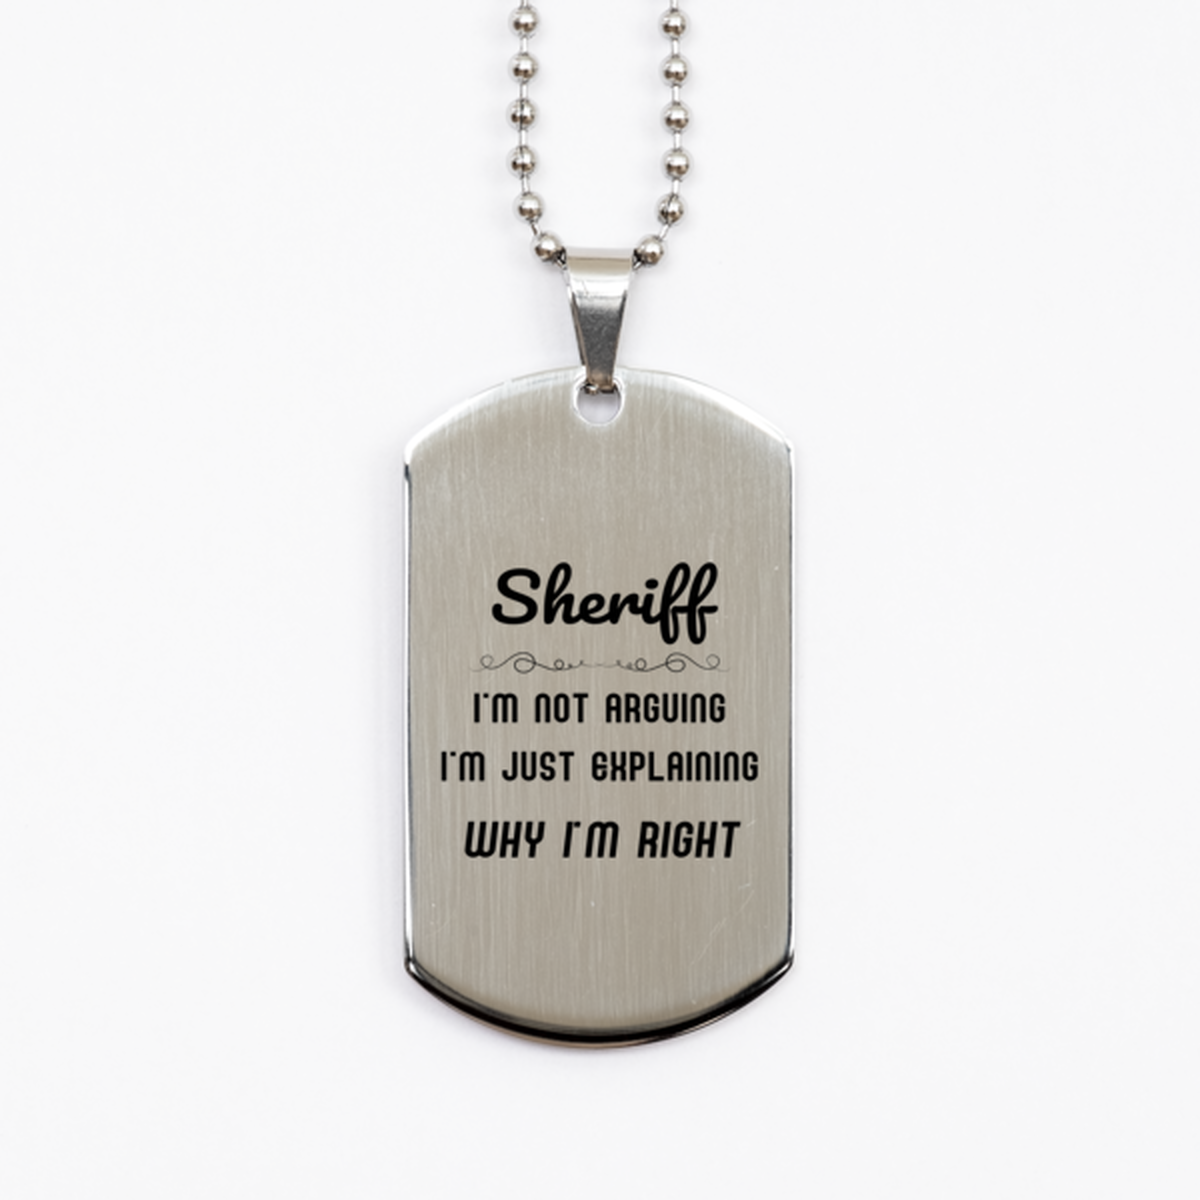 Sheriff I'm not Arguing. I'm Just Explaining Why I'm RIGHT Silver Dog Tag, Funny Saying Quote Sheriff Gifts For Sheriff Graduation Birthday Christmas Gifts for Men Women Coworker